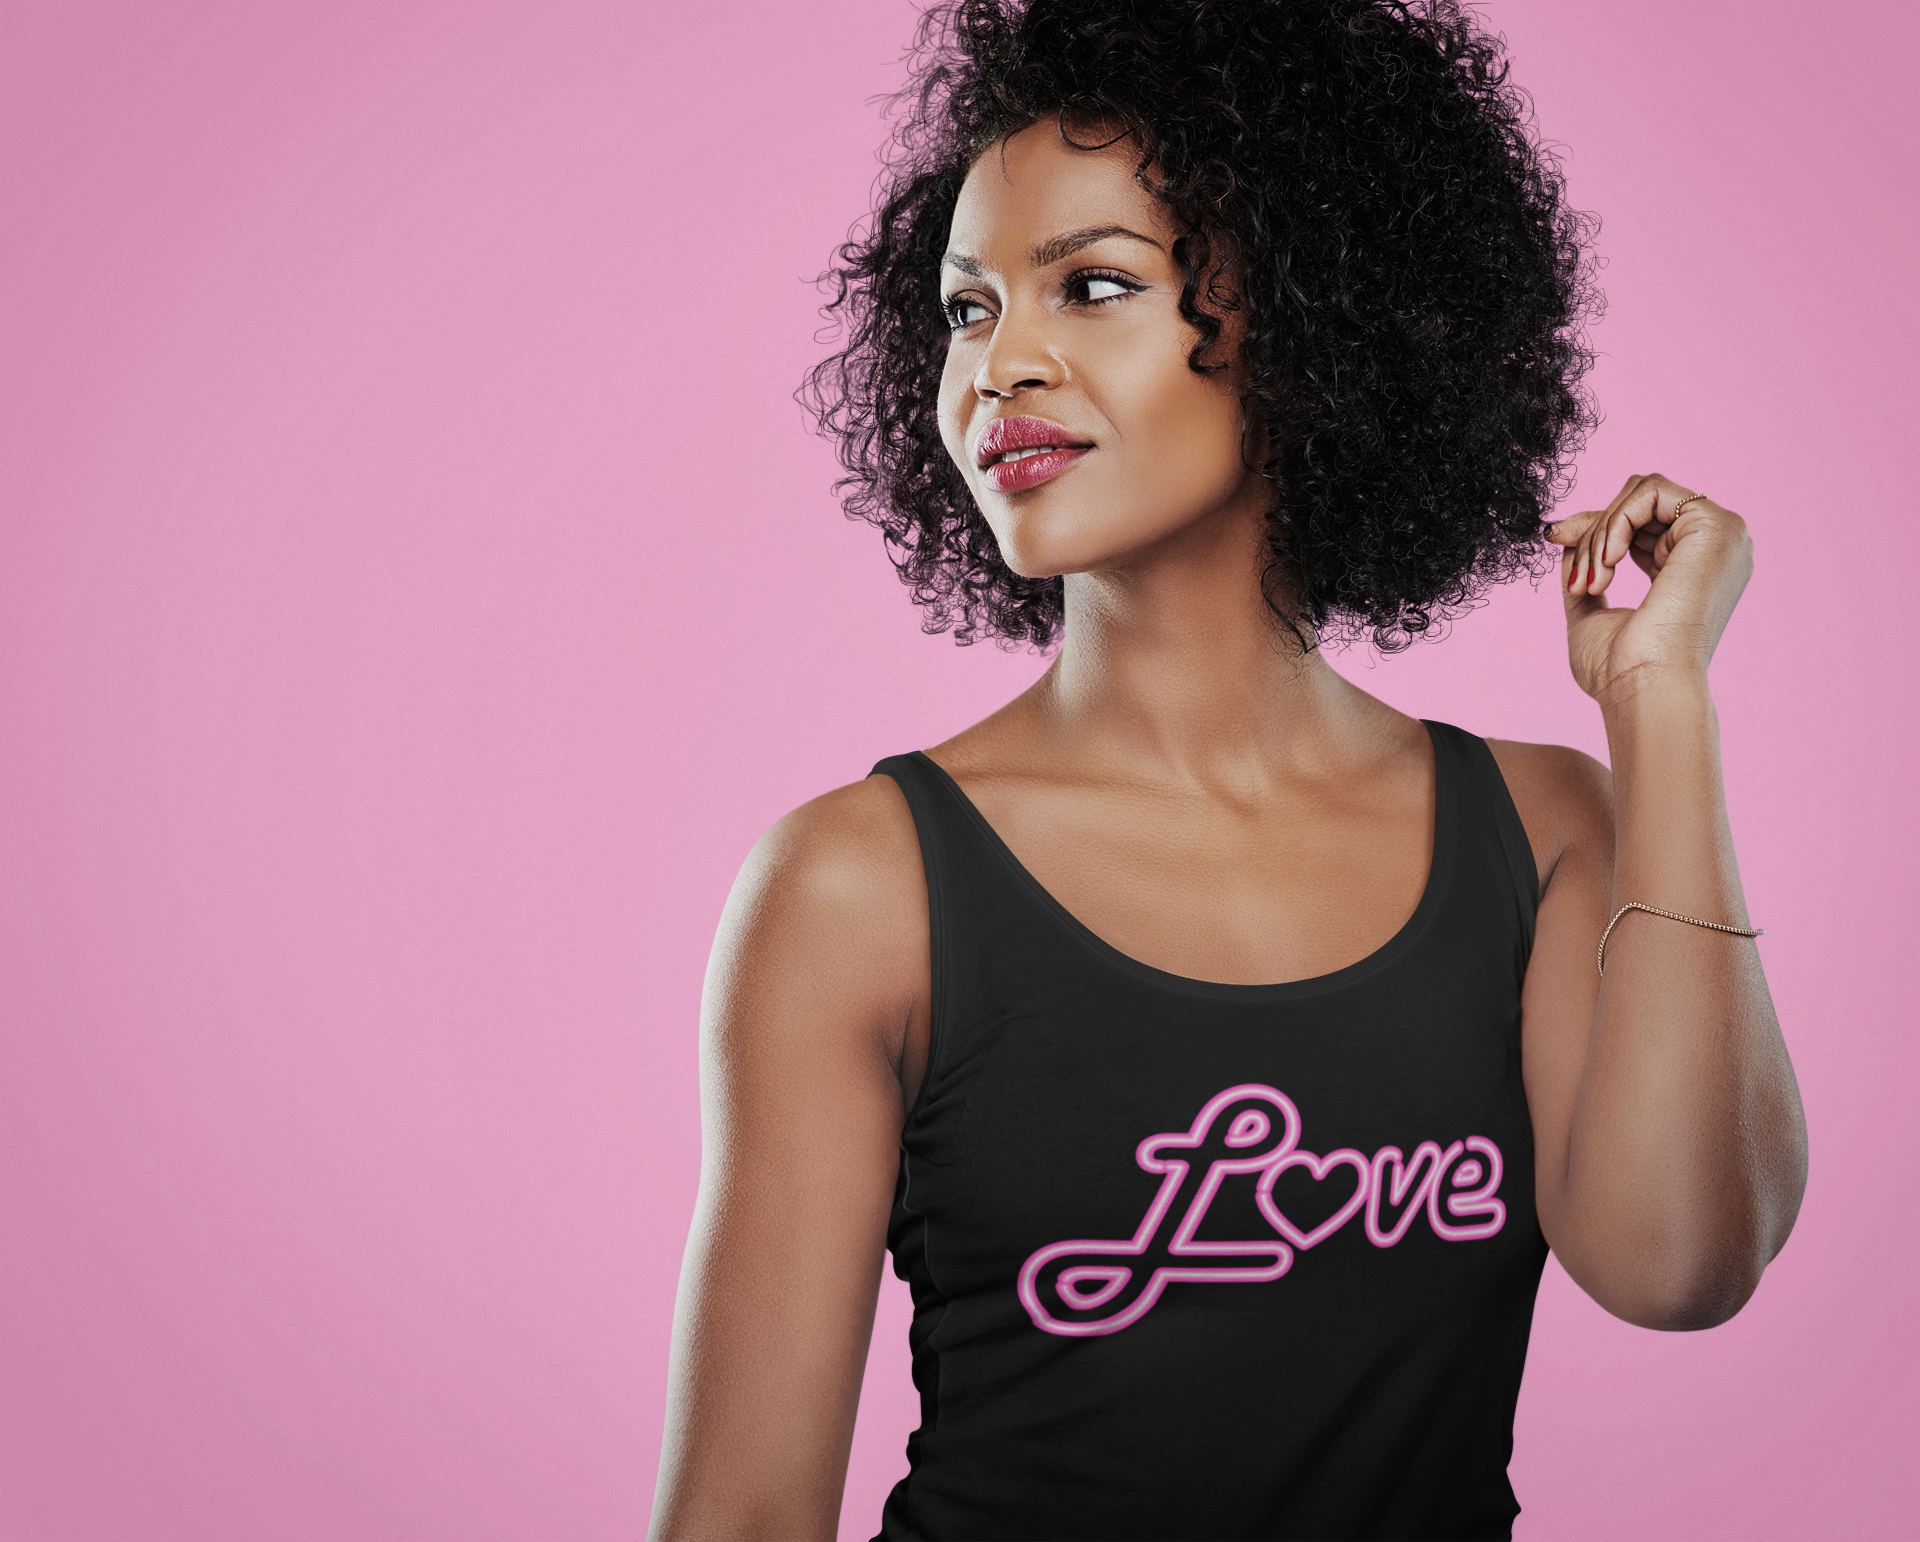 Curly hair black woman wearing black tank-top with pink neon love sign.